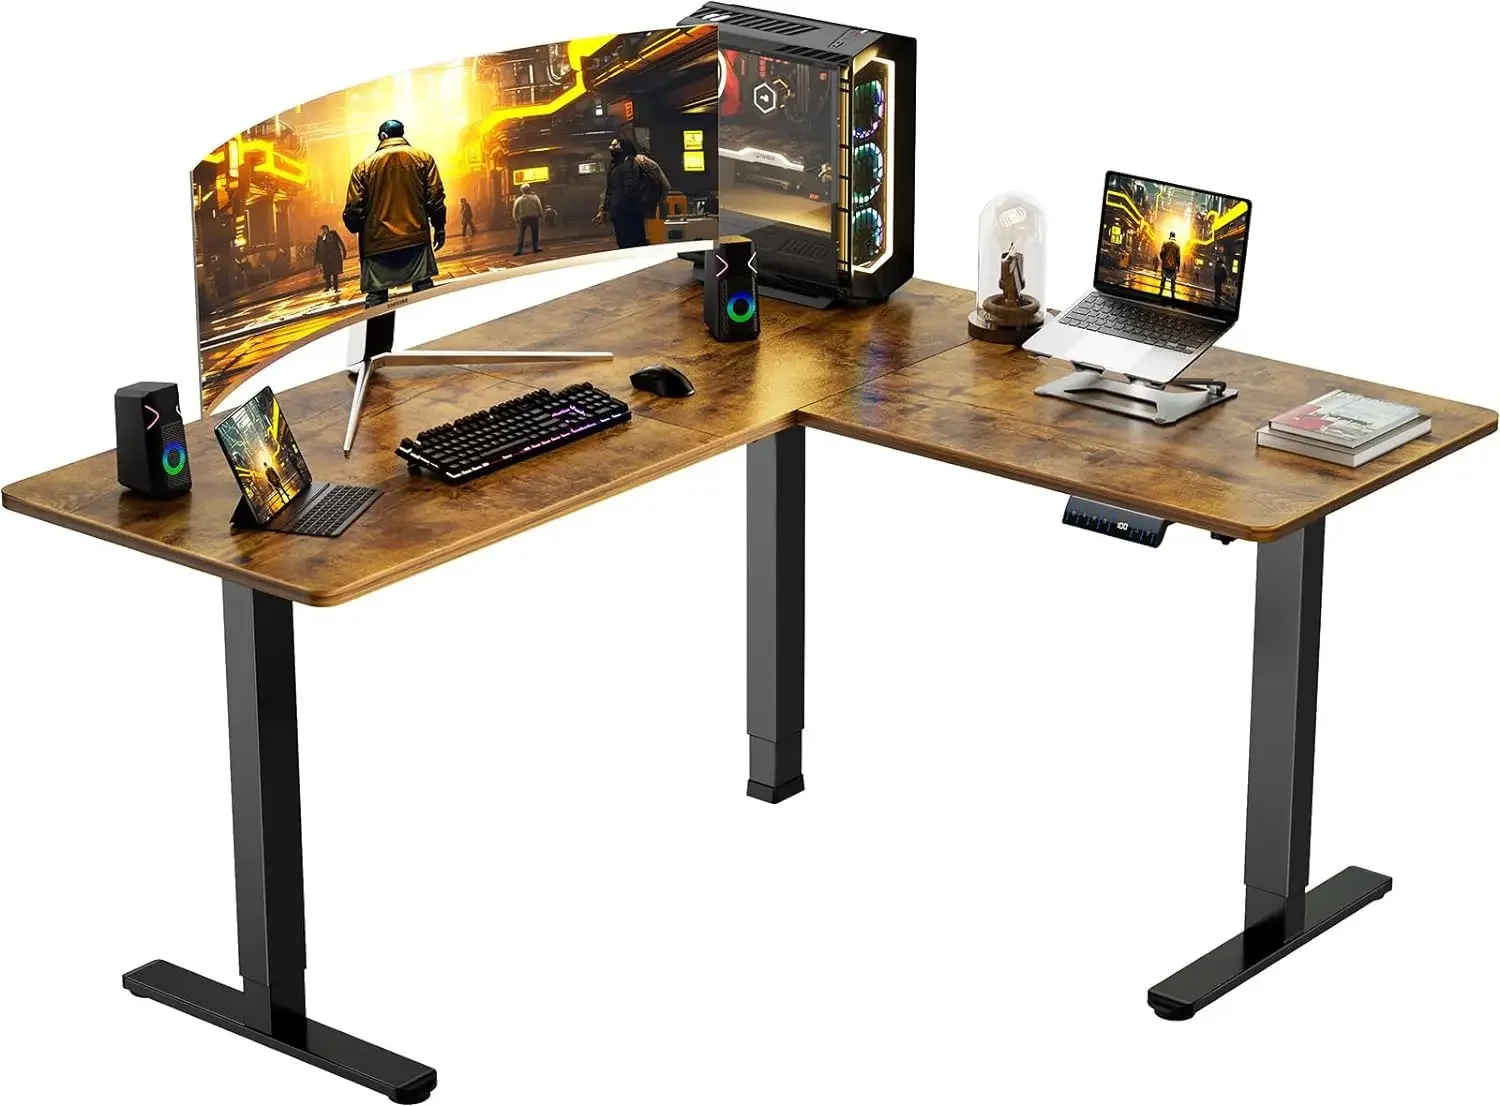 

ErGear L-Shaped Electric Standing Desk, 63 inches Double Motor Height Adjustable Sit Stand up Corner Desk,Large Home Office Desk